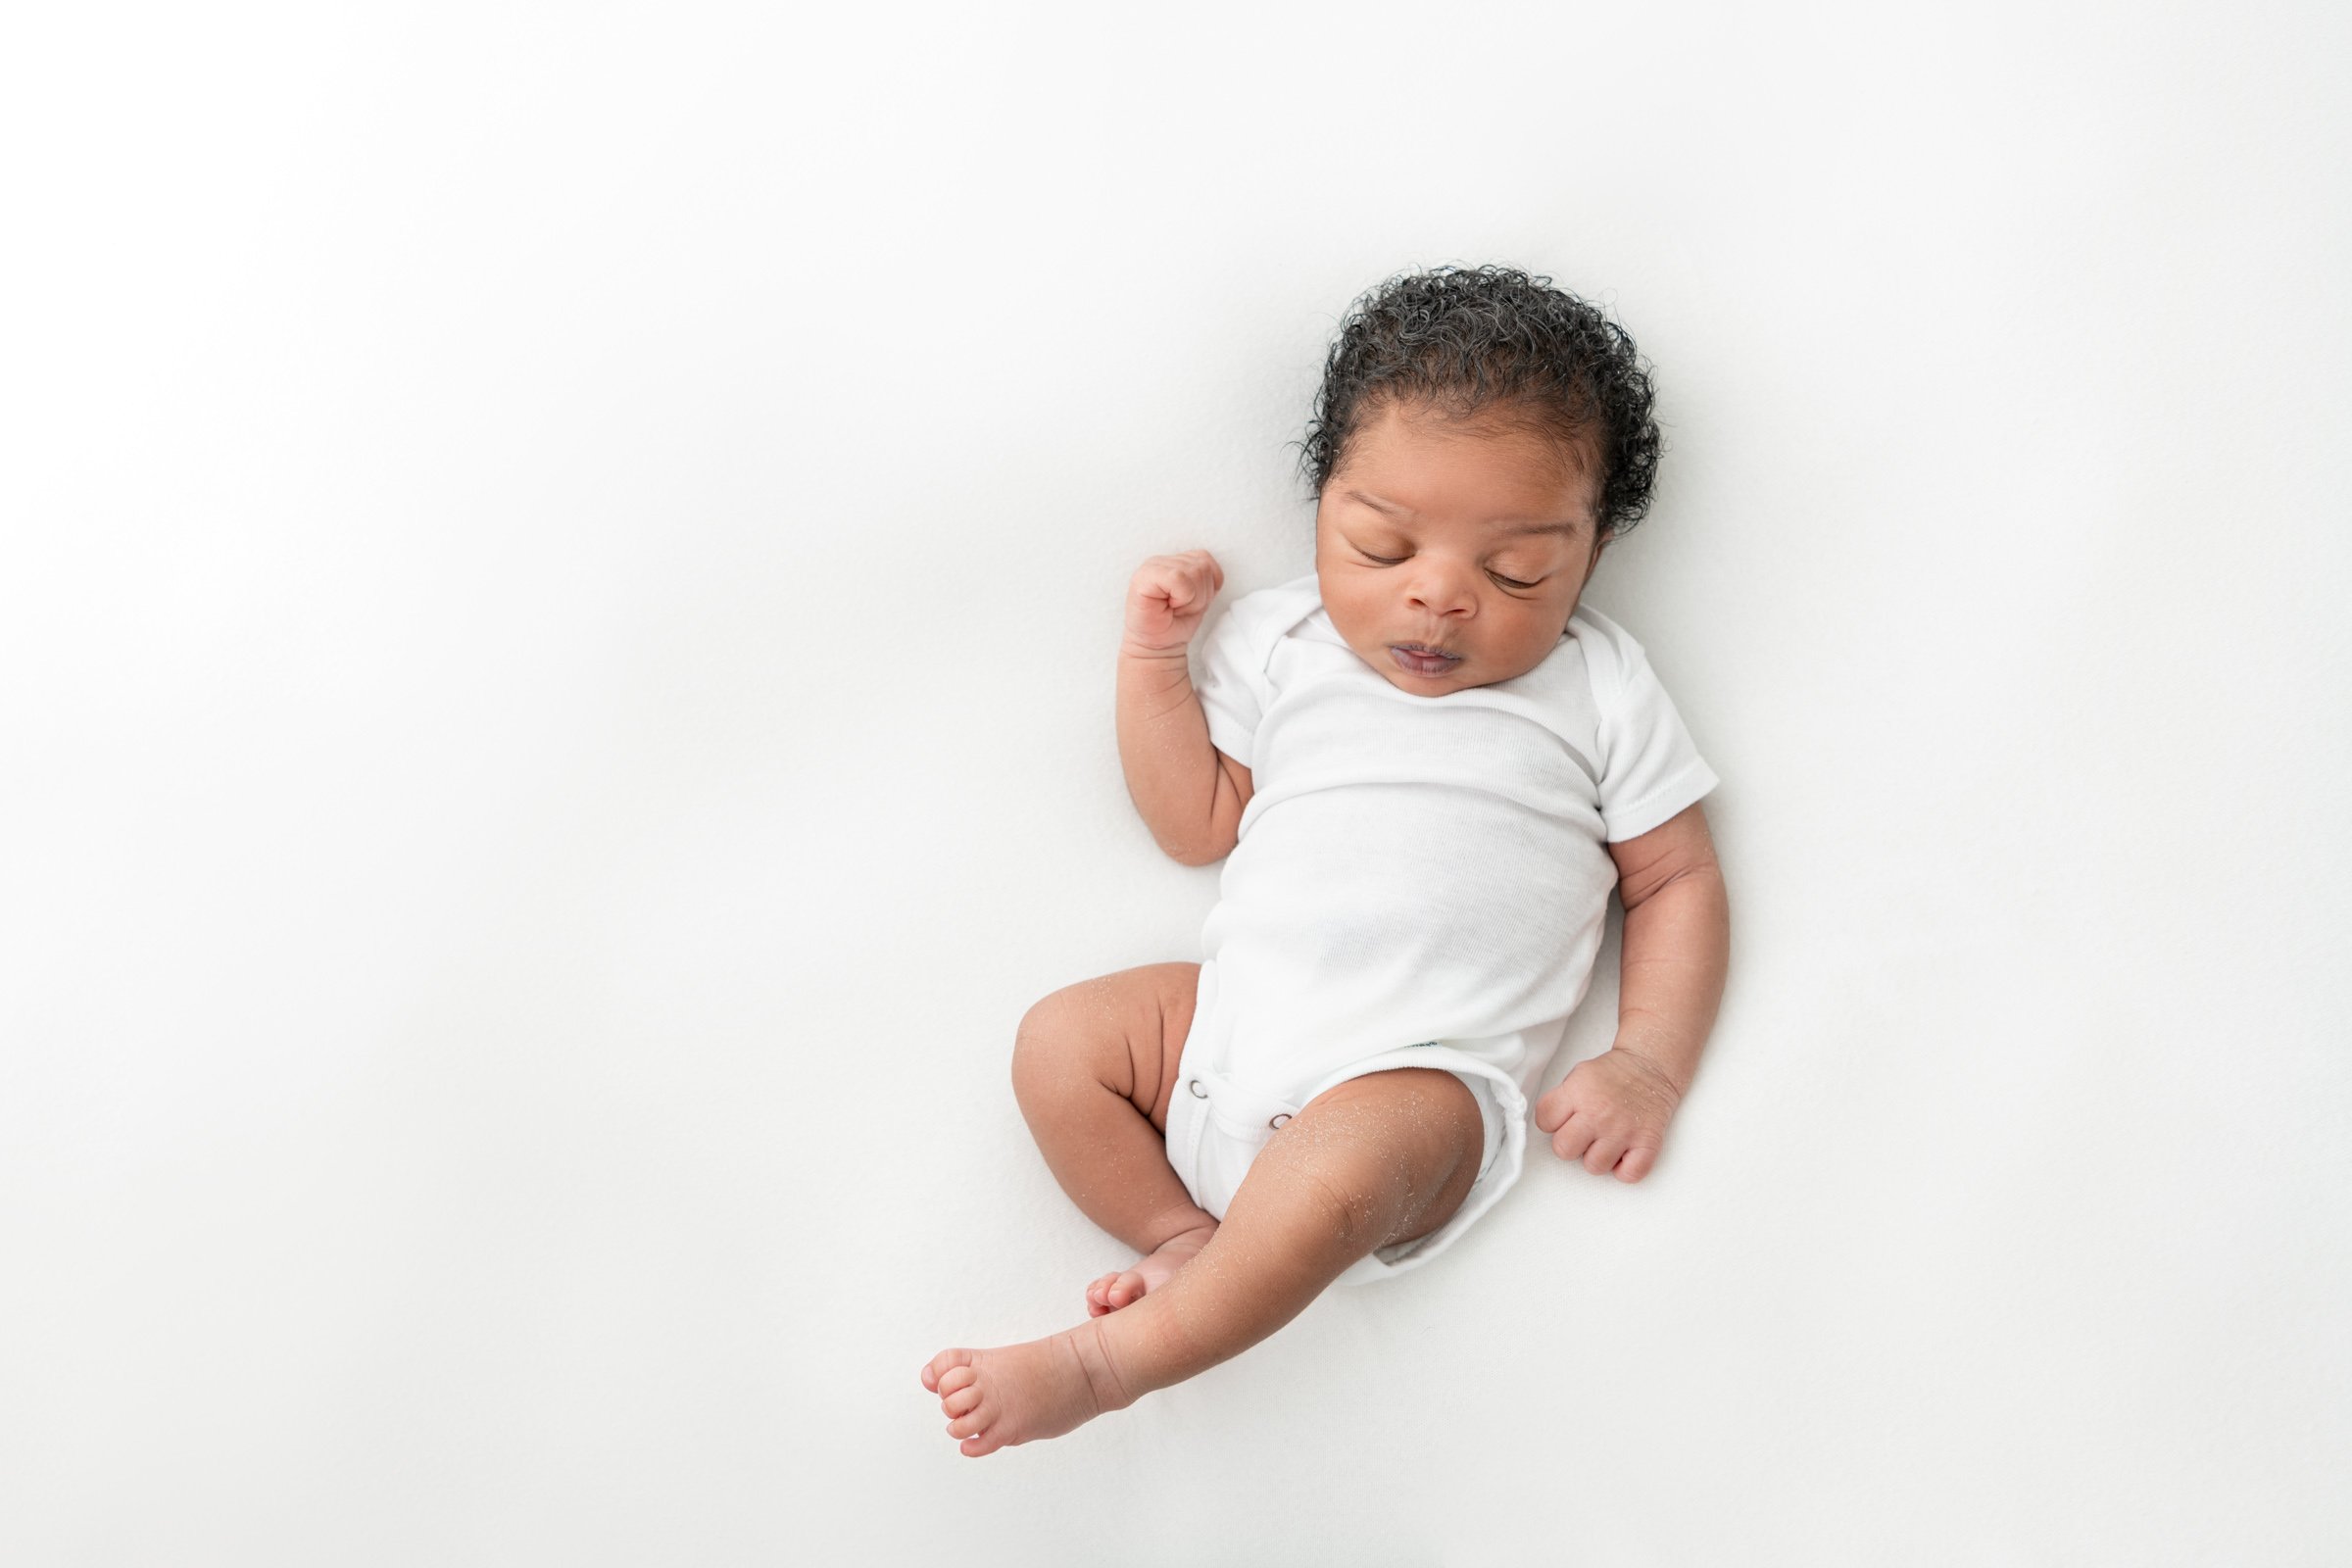  Nicole Hawkins Photography a New Jersey photographer captures a baby boy in a onesie. newborn portraits minimalist newborn photography #nicolehawkinsphotography #NJbabyphotography #newbornportraits #NewJerseyStudioPhotography #newbornsession 